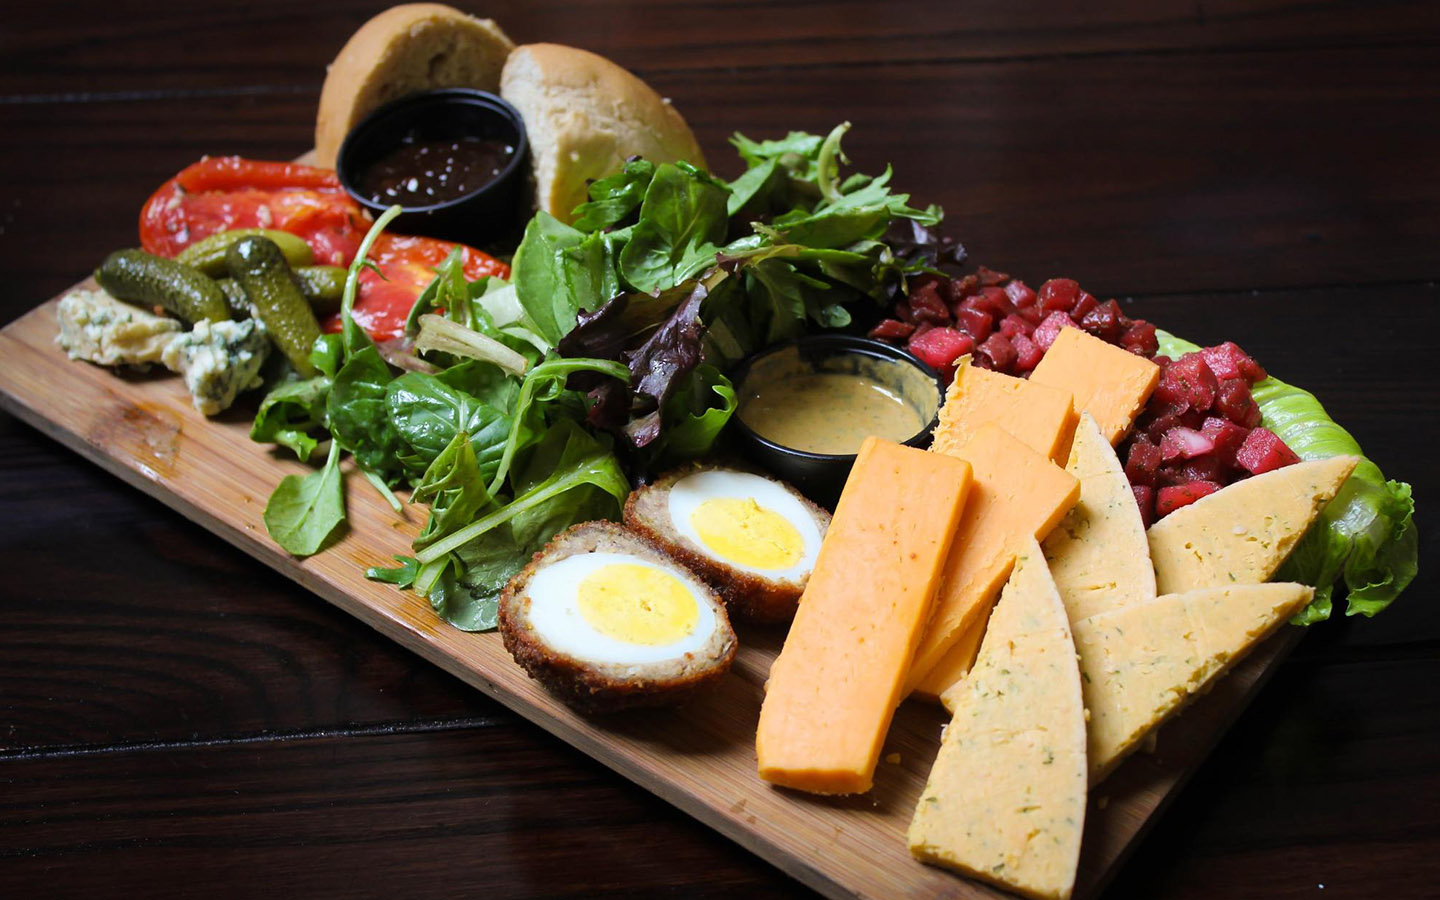 Ploughman's Platter from Leaky Cauldron